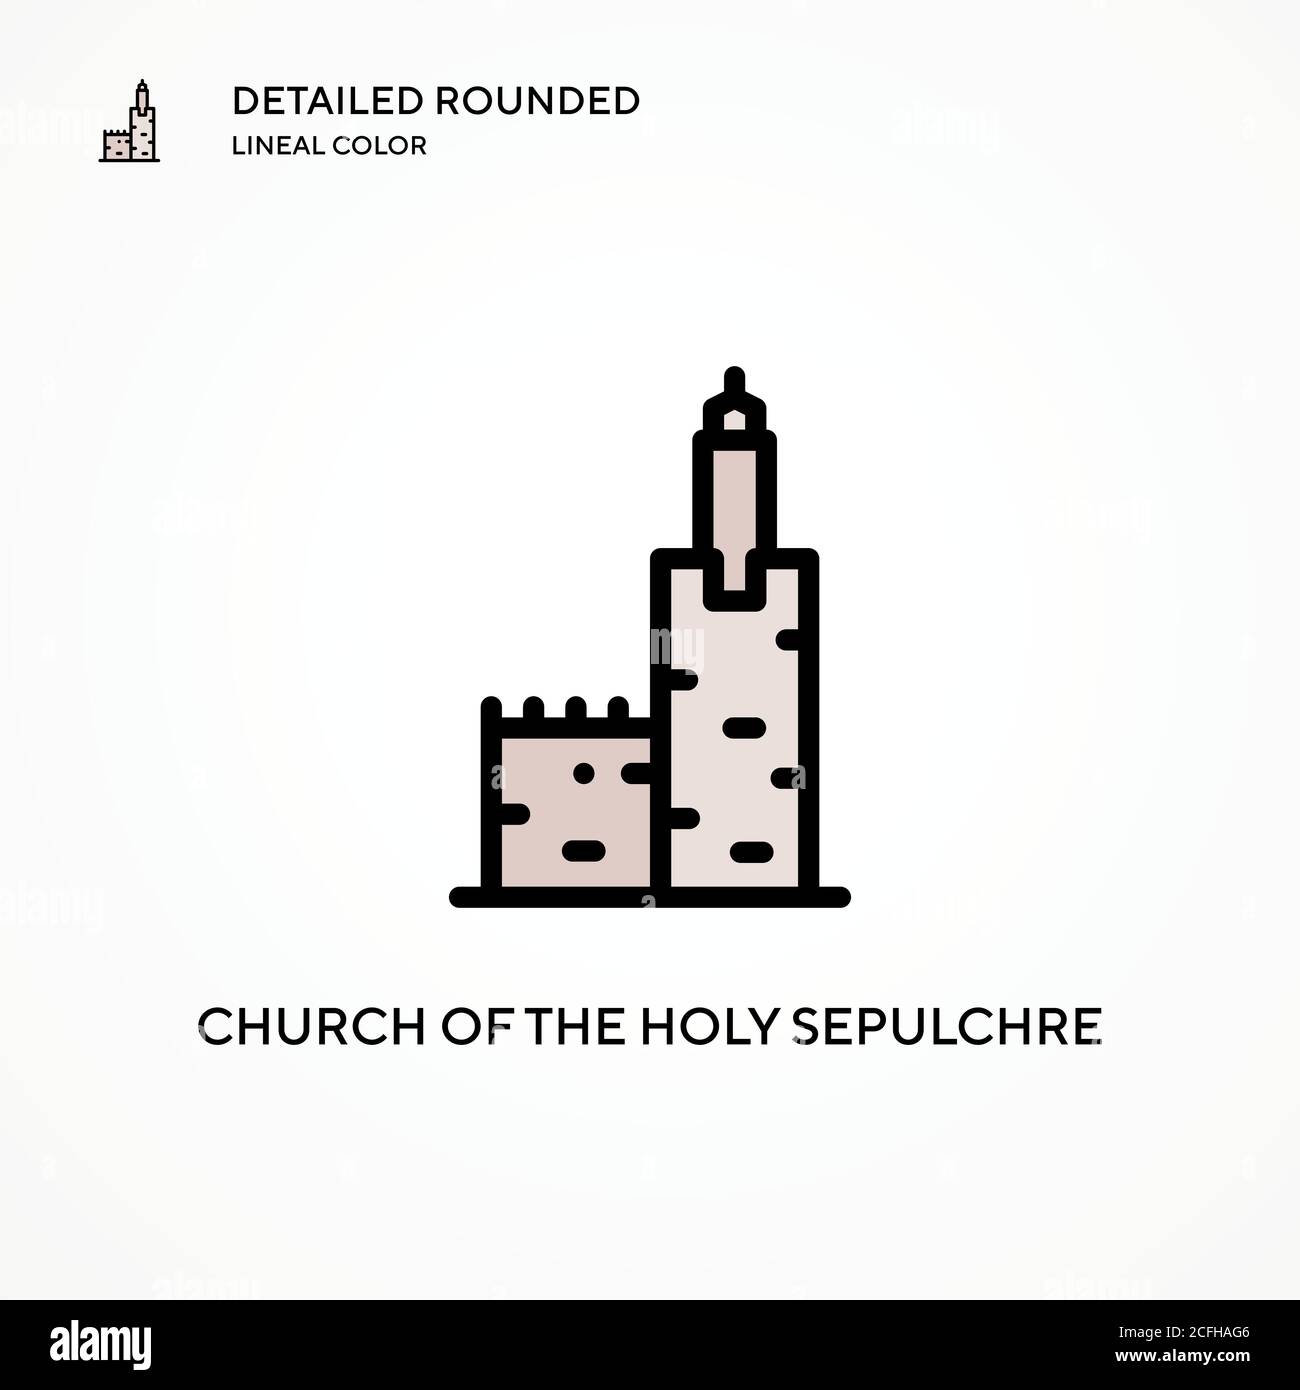 Church of the holy sepulchre vector icon. Modern vector illustration concepts. Easy to edit and customize. Stock Vector